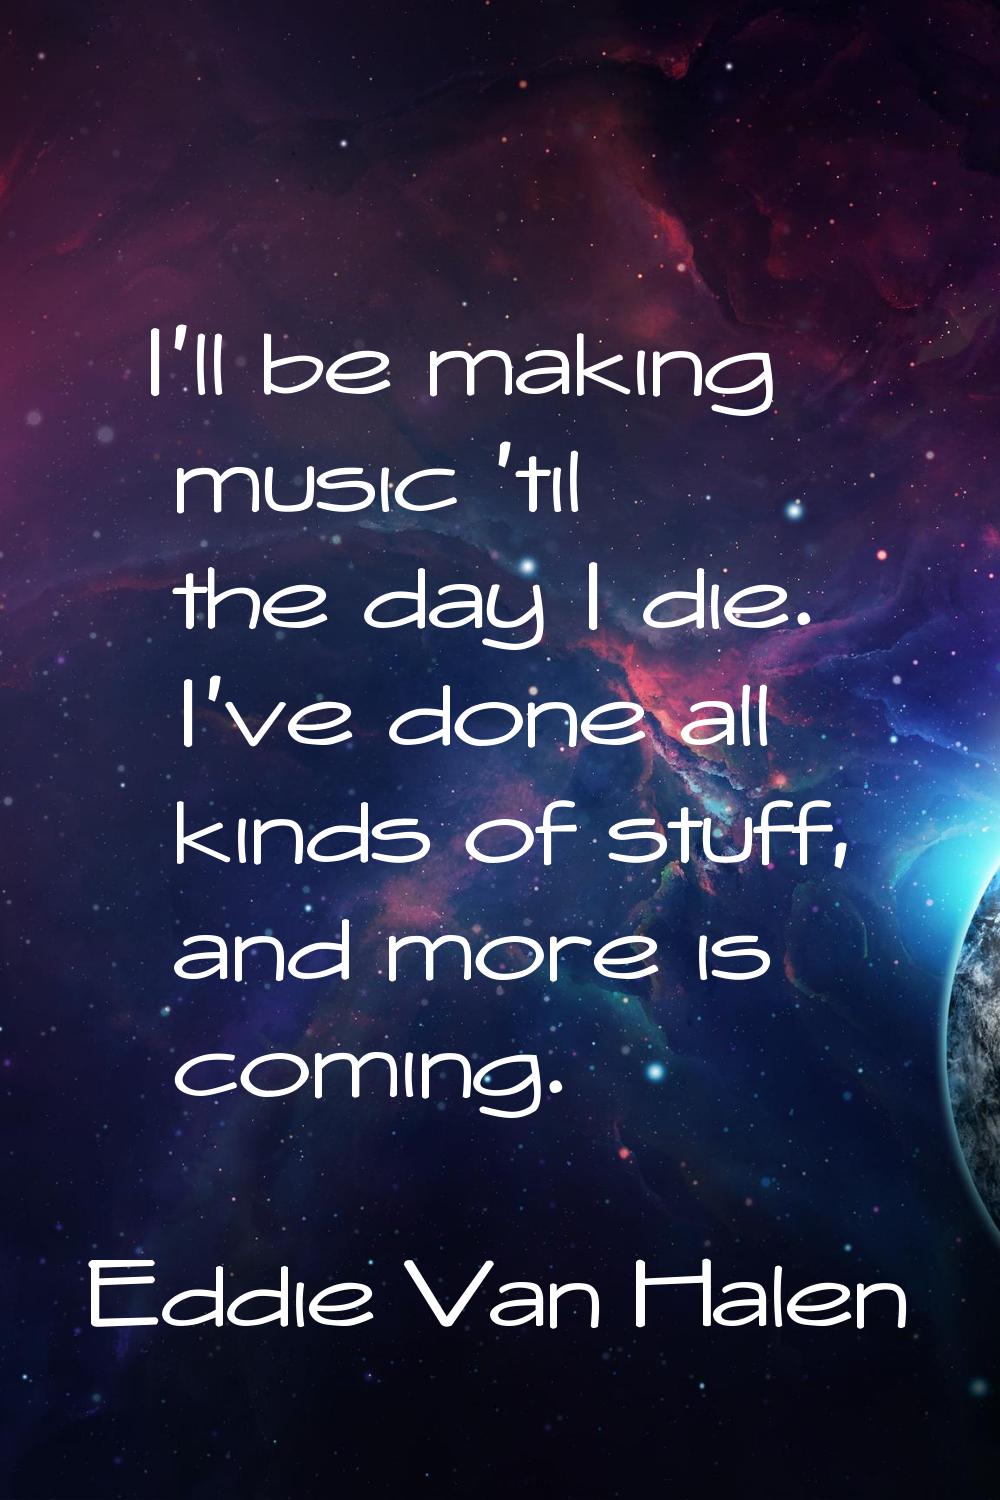 I'll be making music 'til the day I die. I've done all kinds of stuff, and more is coming.